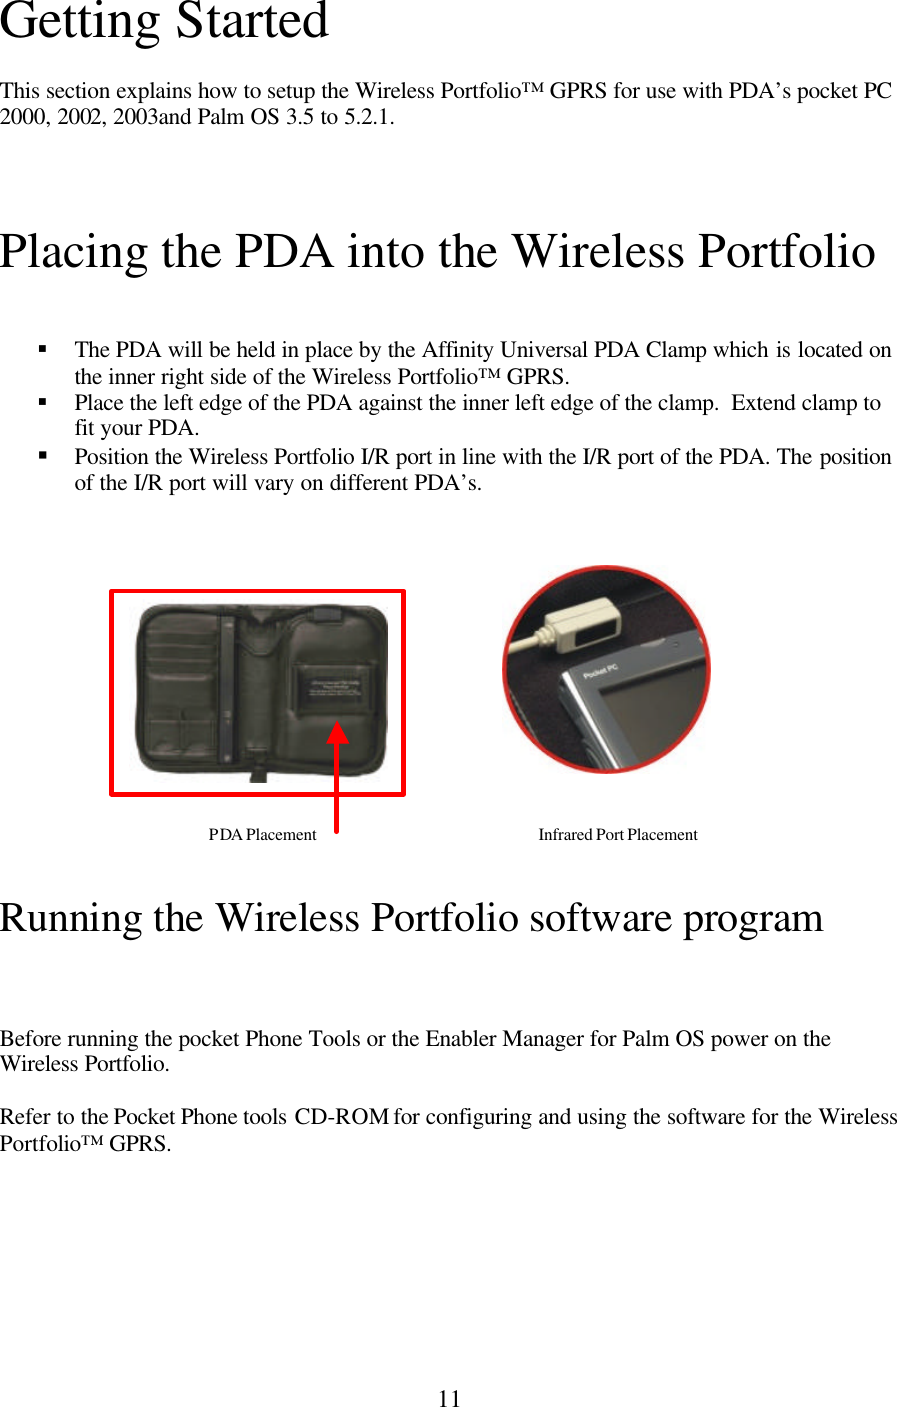 11 Getting Started  This section explains how to setup the Wireless Portfolio™ GPRS for use with PDA’s pocket PC 2000, 2002, 2003and Palm OS 3.5 to 5.2.1.   Placing the PDA into the Wireless Portfolio   § The PDA will be held in place by the Affinity Universal PDA Clamp which is located on the inner right side of the Wireless Portfolio™ GPRS. § Place the left edge of the PDA against the inner left edge of the clamp.  Extend clamp to fit your PDA. § Position the Wireless Portfolio I/R port in line with the I/R port of the PDA. The position of the I/R port will vary on different PDA’s.               Running the Wireless Portfolio software program    Before running the pocket Phone Tools or the Enabler Manager for Palm OS power on the Wireless Portfolio.  Refer to the Pocket Phone tools CD-ROM for configuring and using the software for the Wireless Portfolio™ GPRS.      PDA Placement Infrared Port Placement 